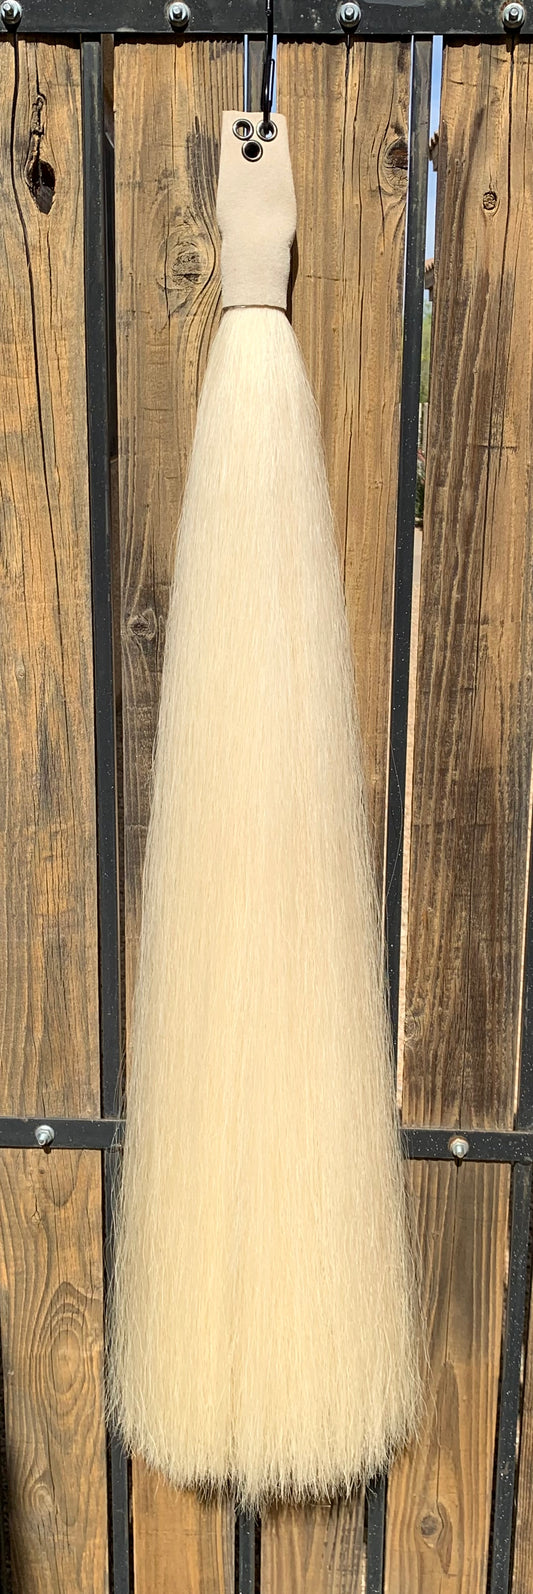 Pure White 1.5 lb 31” Tail Extension With Weight Setup